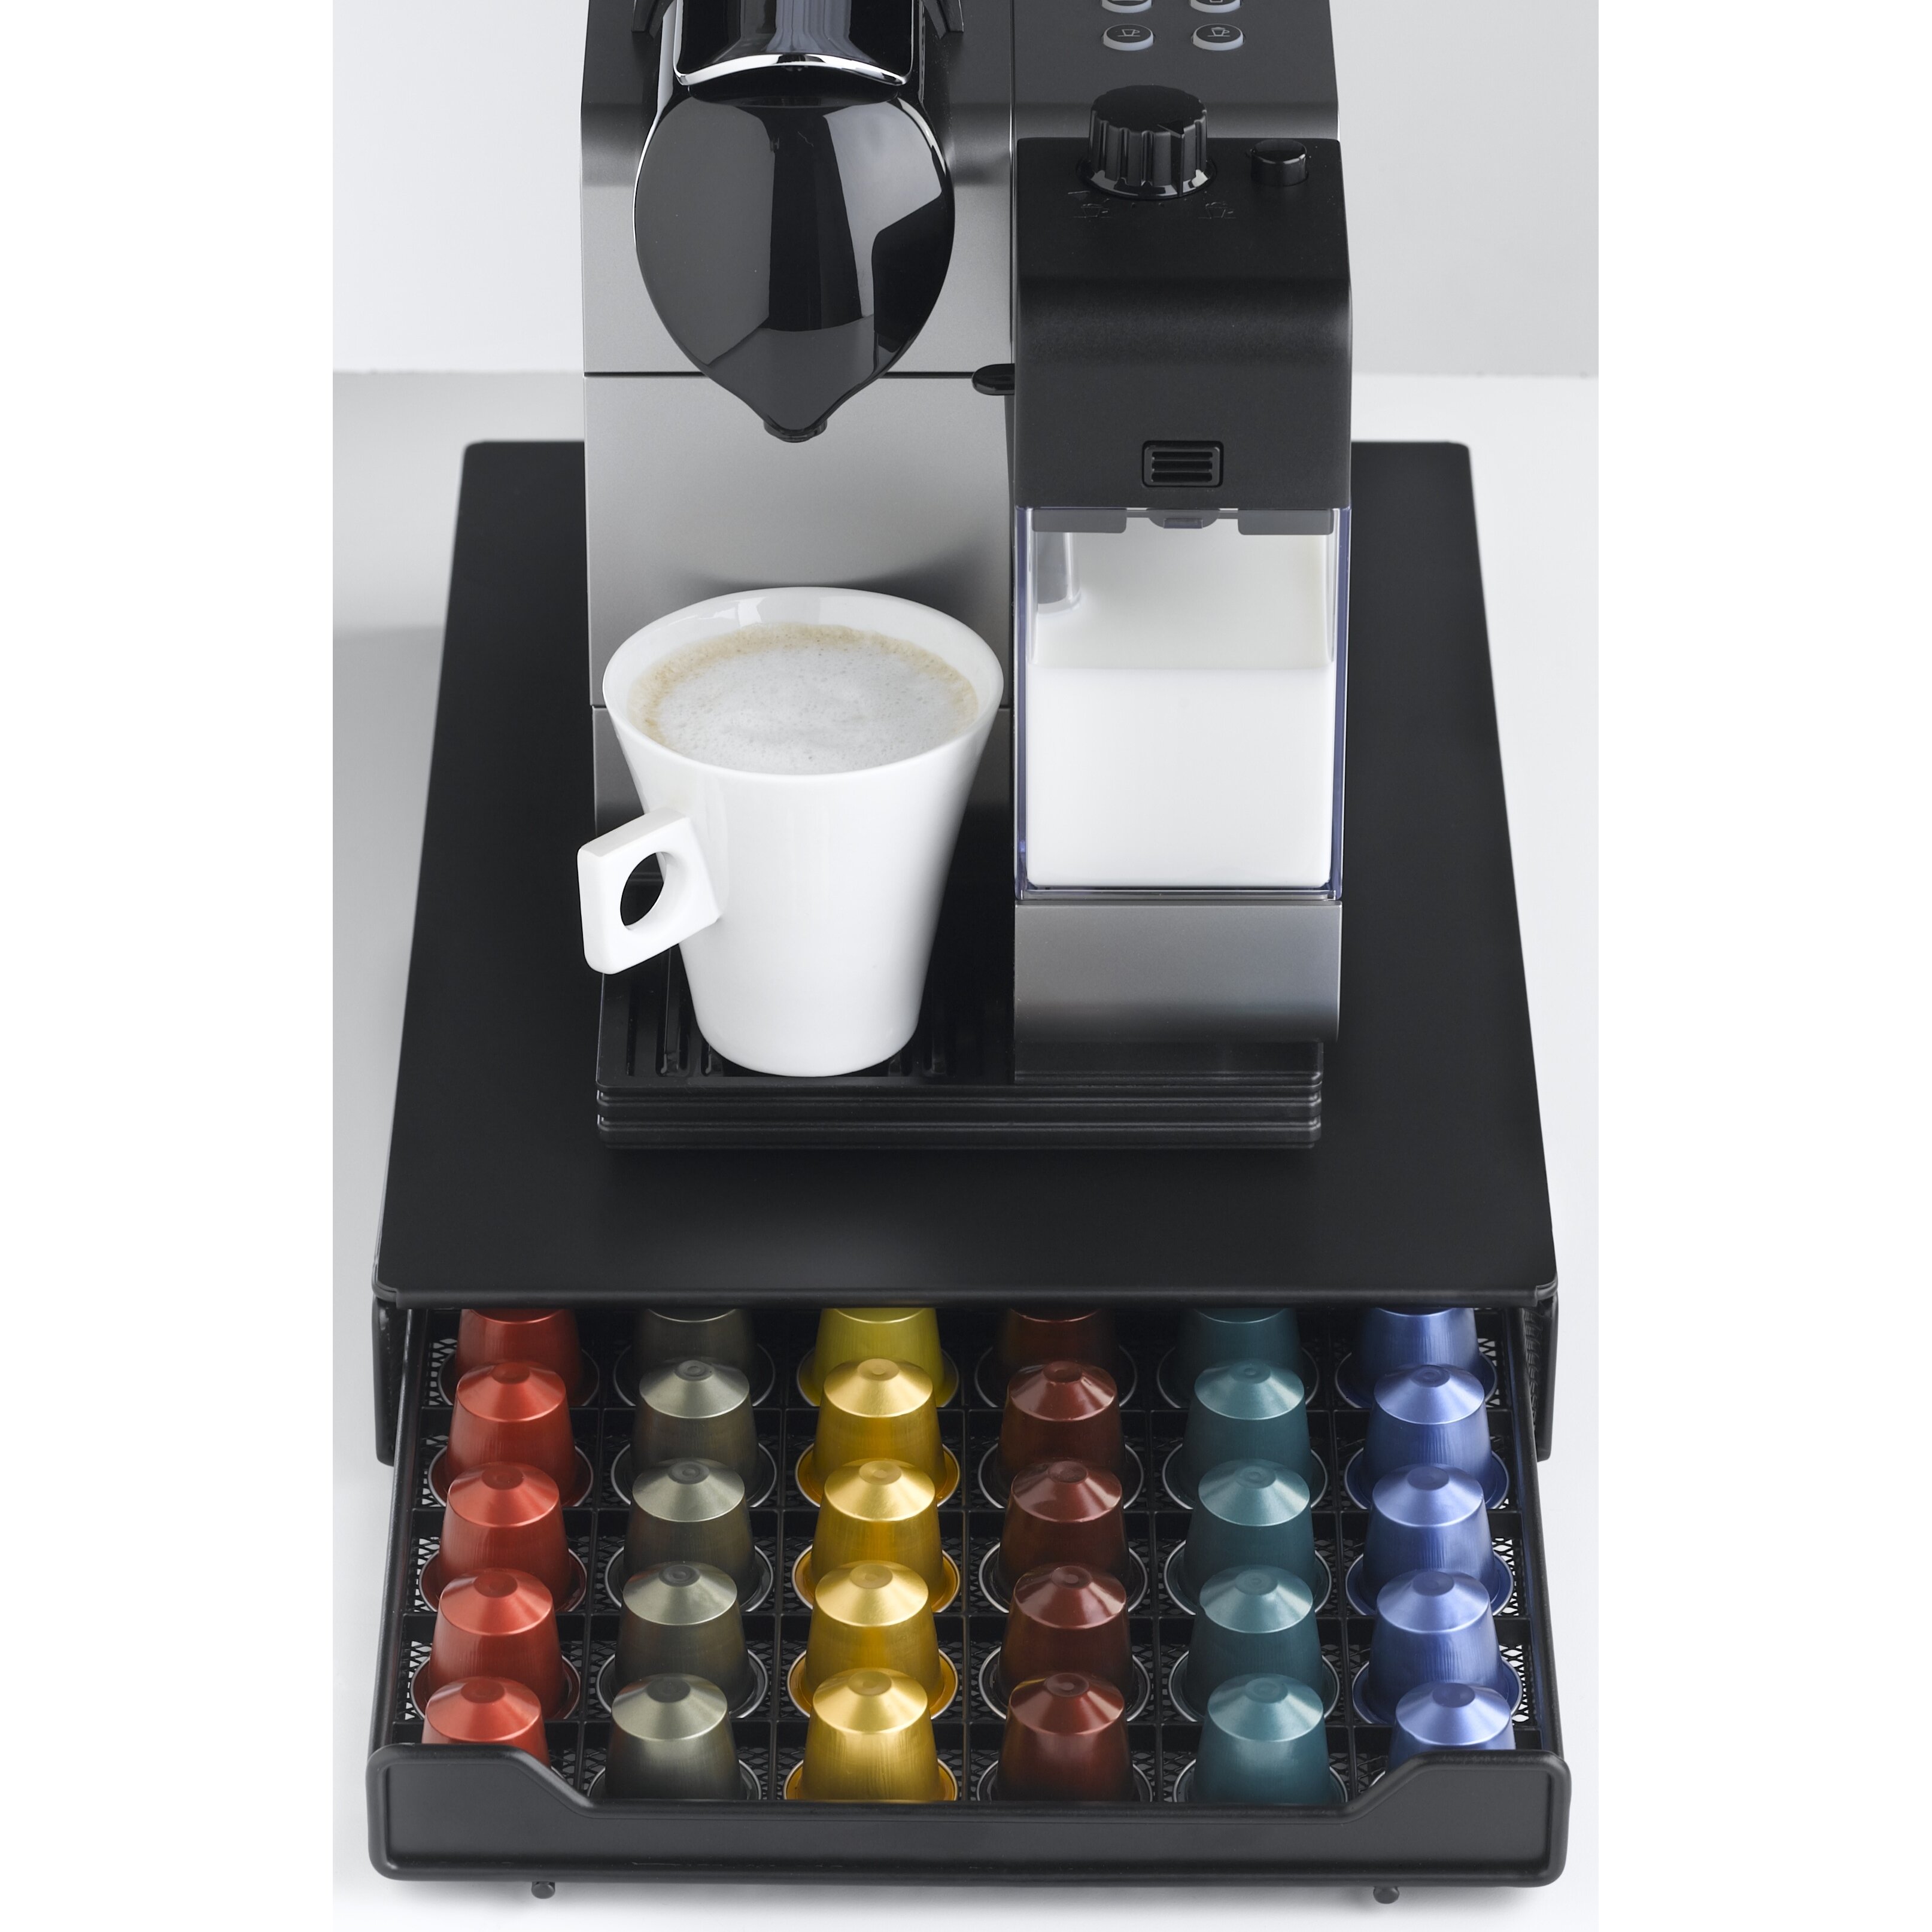 Nifty Home Products Nespresso Storage 60 Coffee Pod Drawer & Reviews